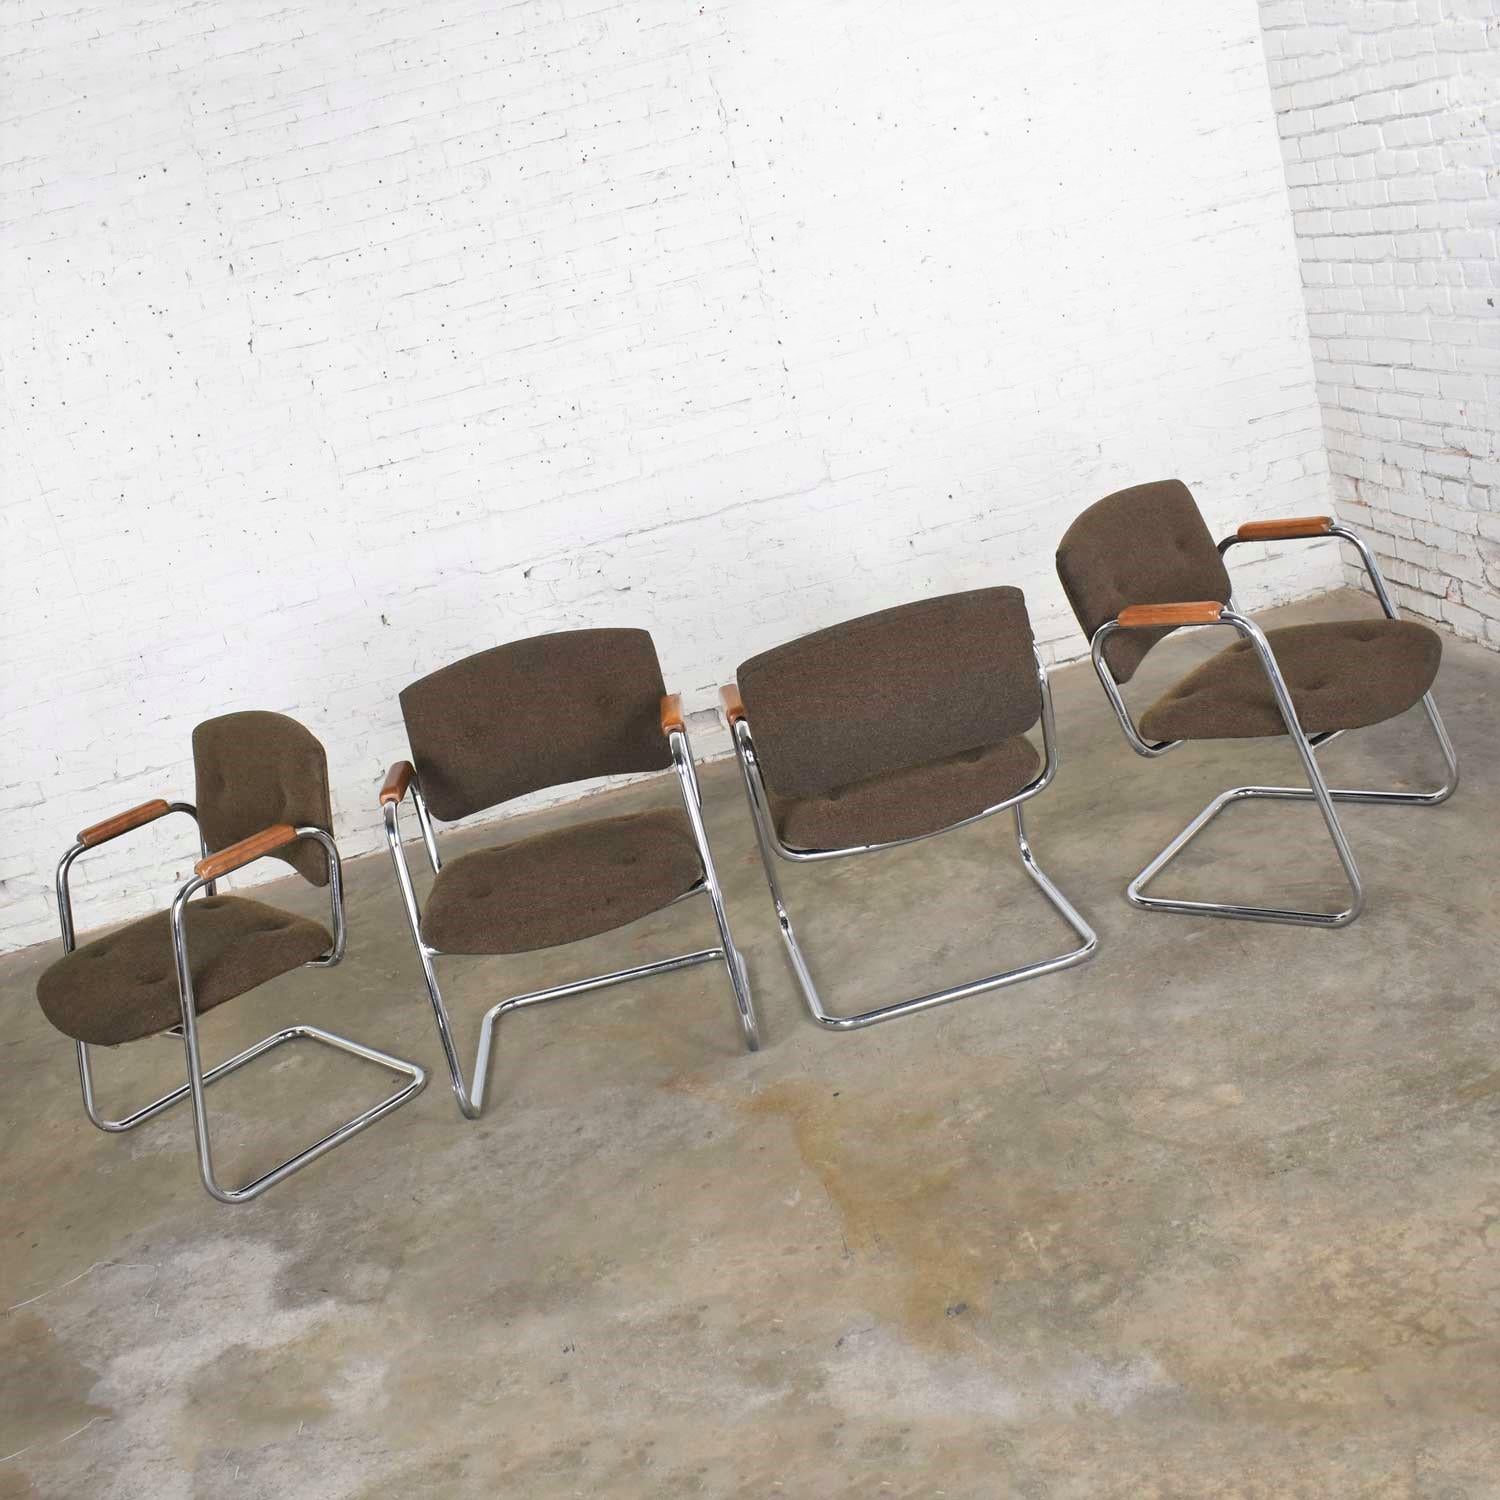 Modern 4 Cantilever Armchairs Chrome Brown w/ Wood Arms Style of Steelcase or Pollock